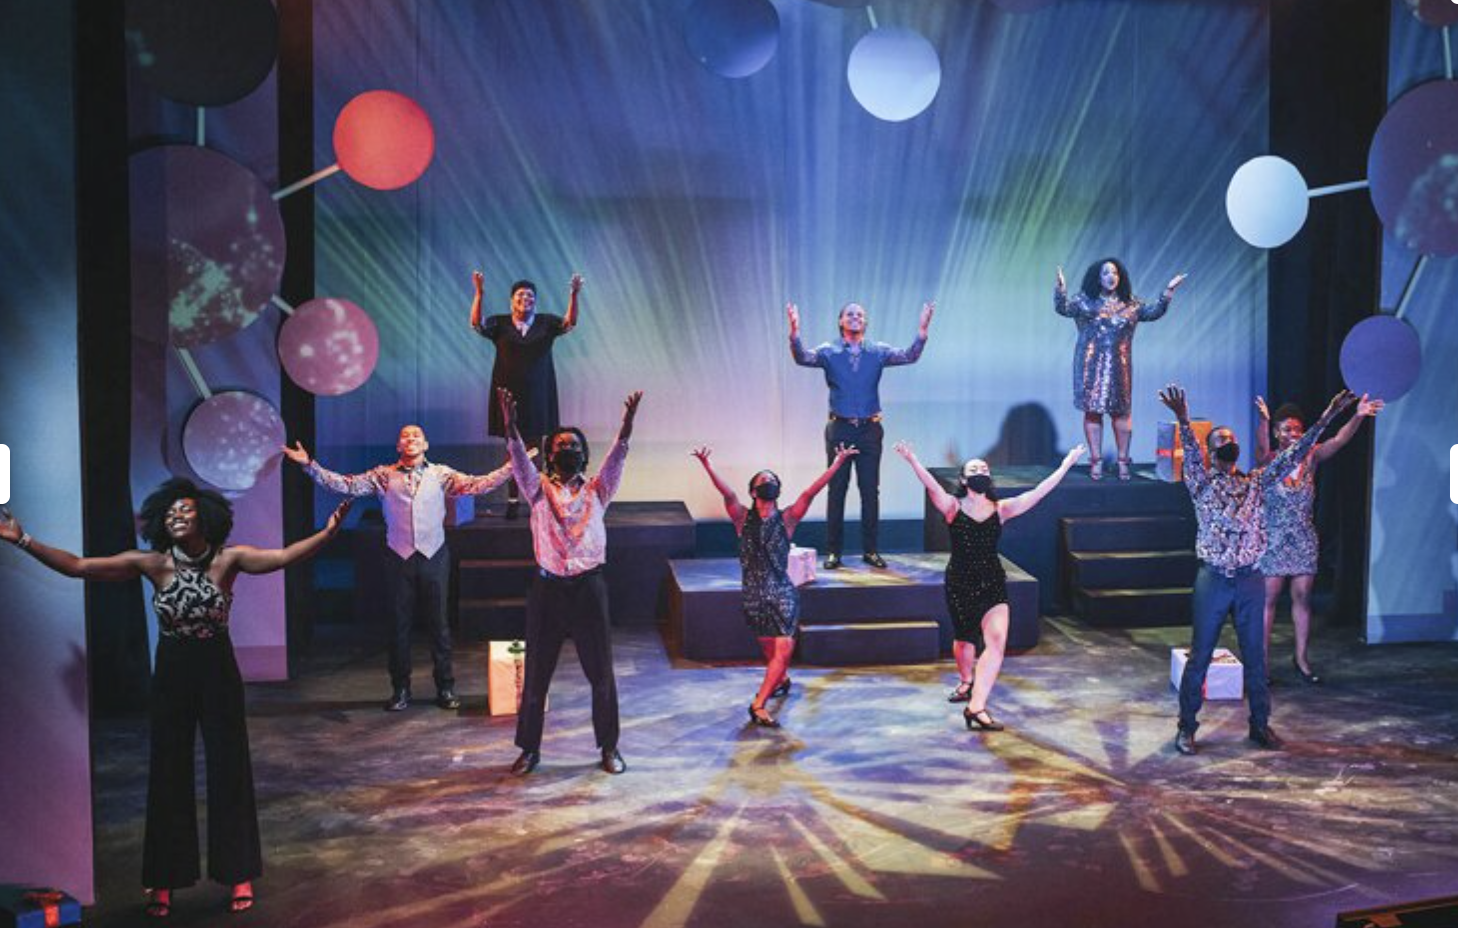 Karamu House, 10 people on stage with colorful lighting hold their arms out